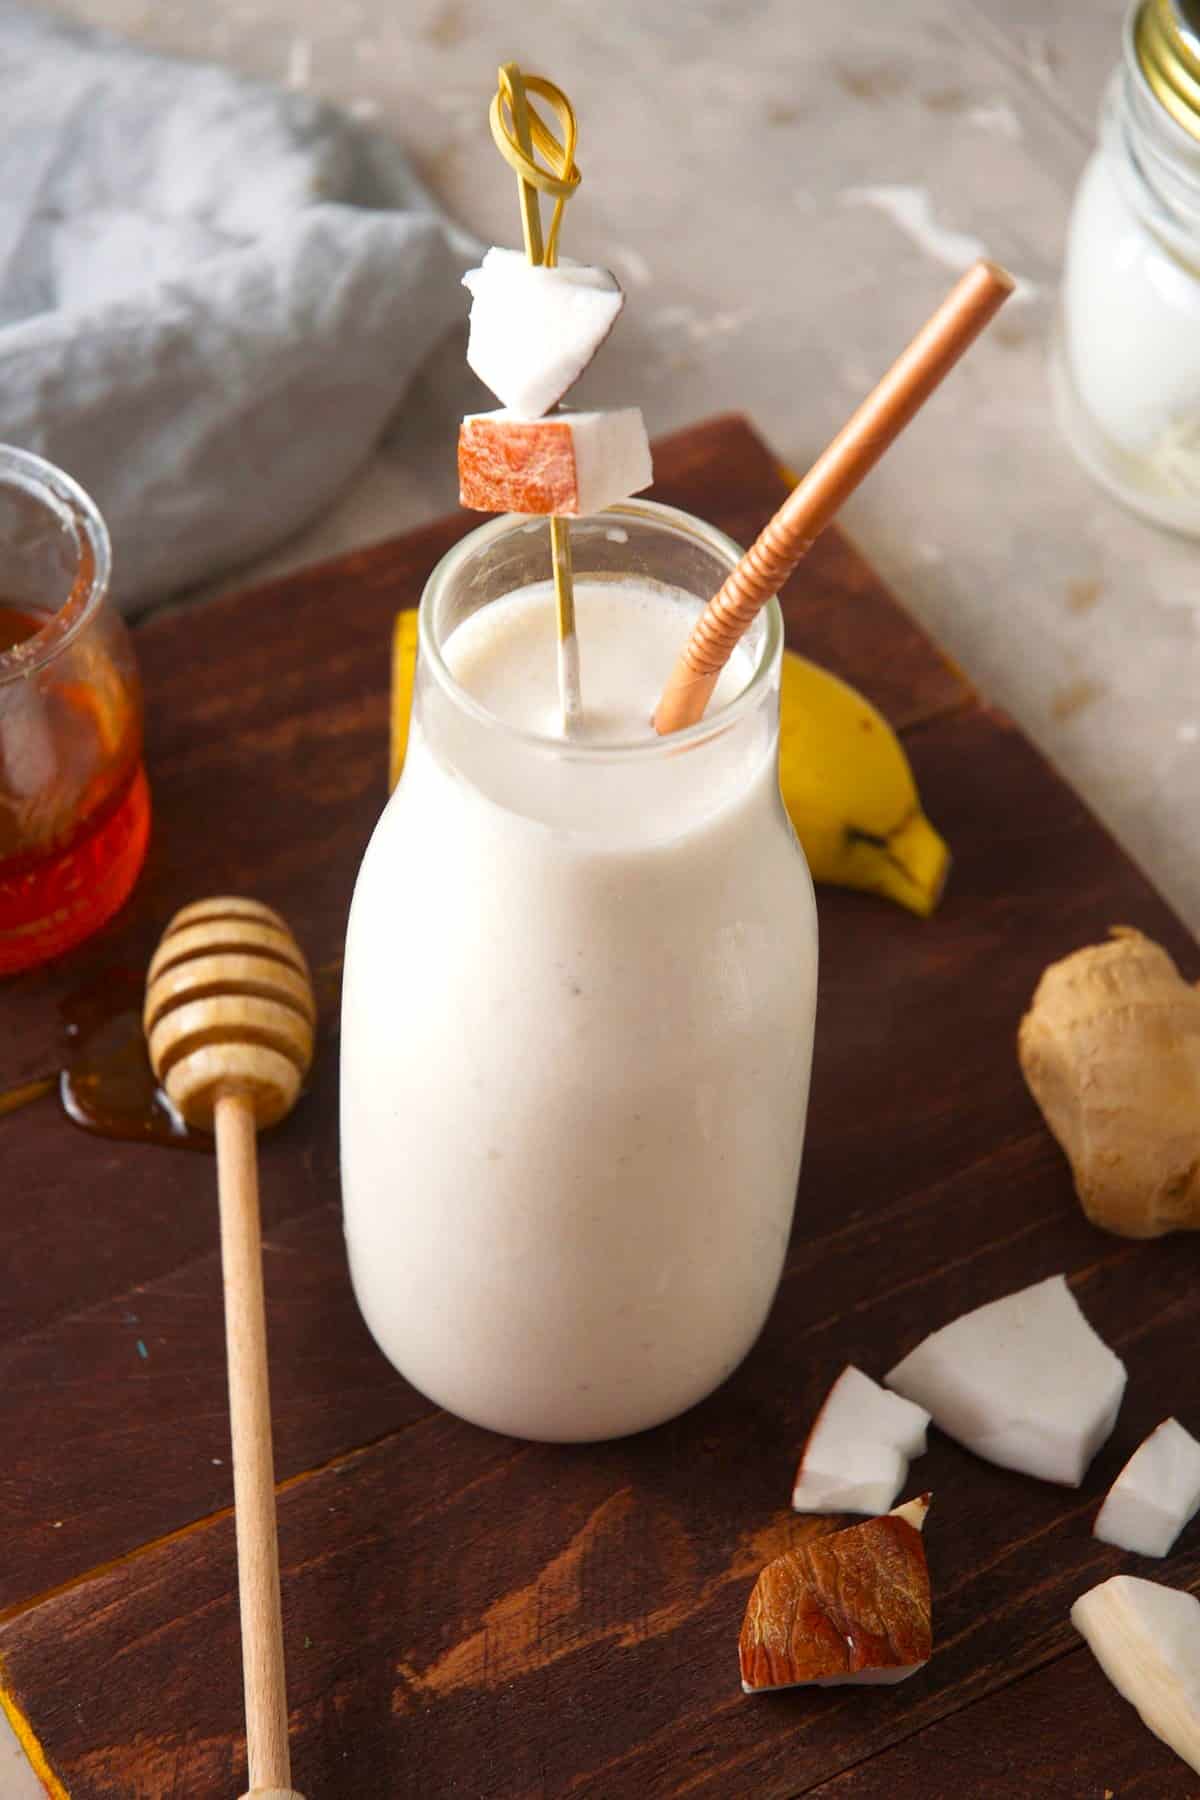 Greek yogurt smoothie in glass with straw and chunks of coconut as a garnish.